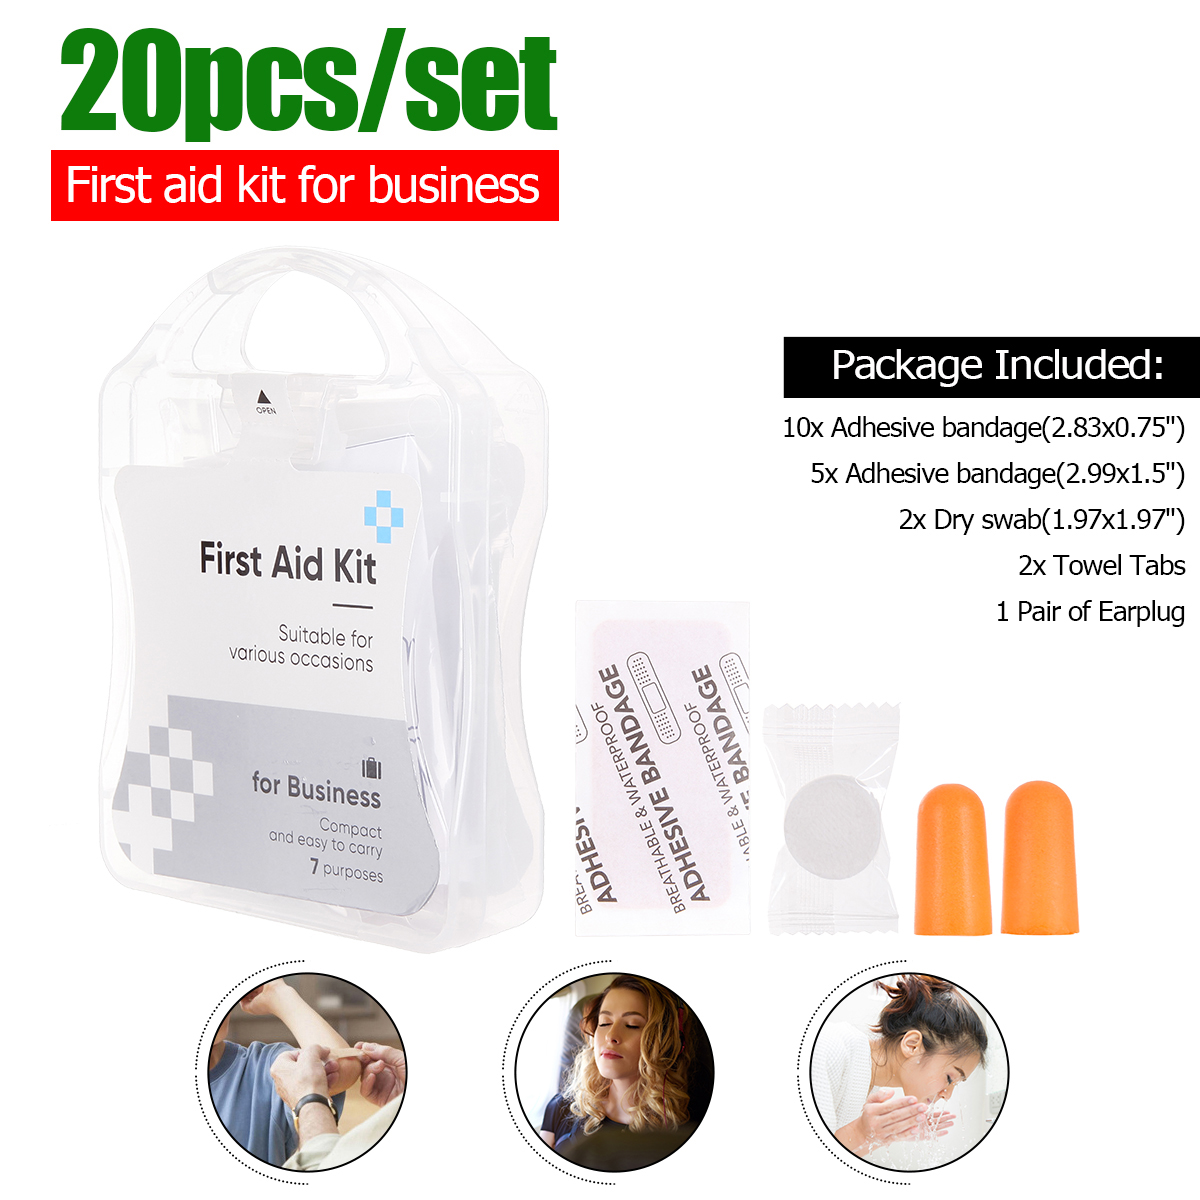 20PCSSet-Outdoor-Camping-Portable-First-Aid-Kit-For-Business-Travelling--Adhesive-BandageTowel-TabsD-1632140-1